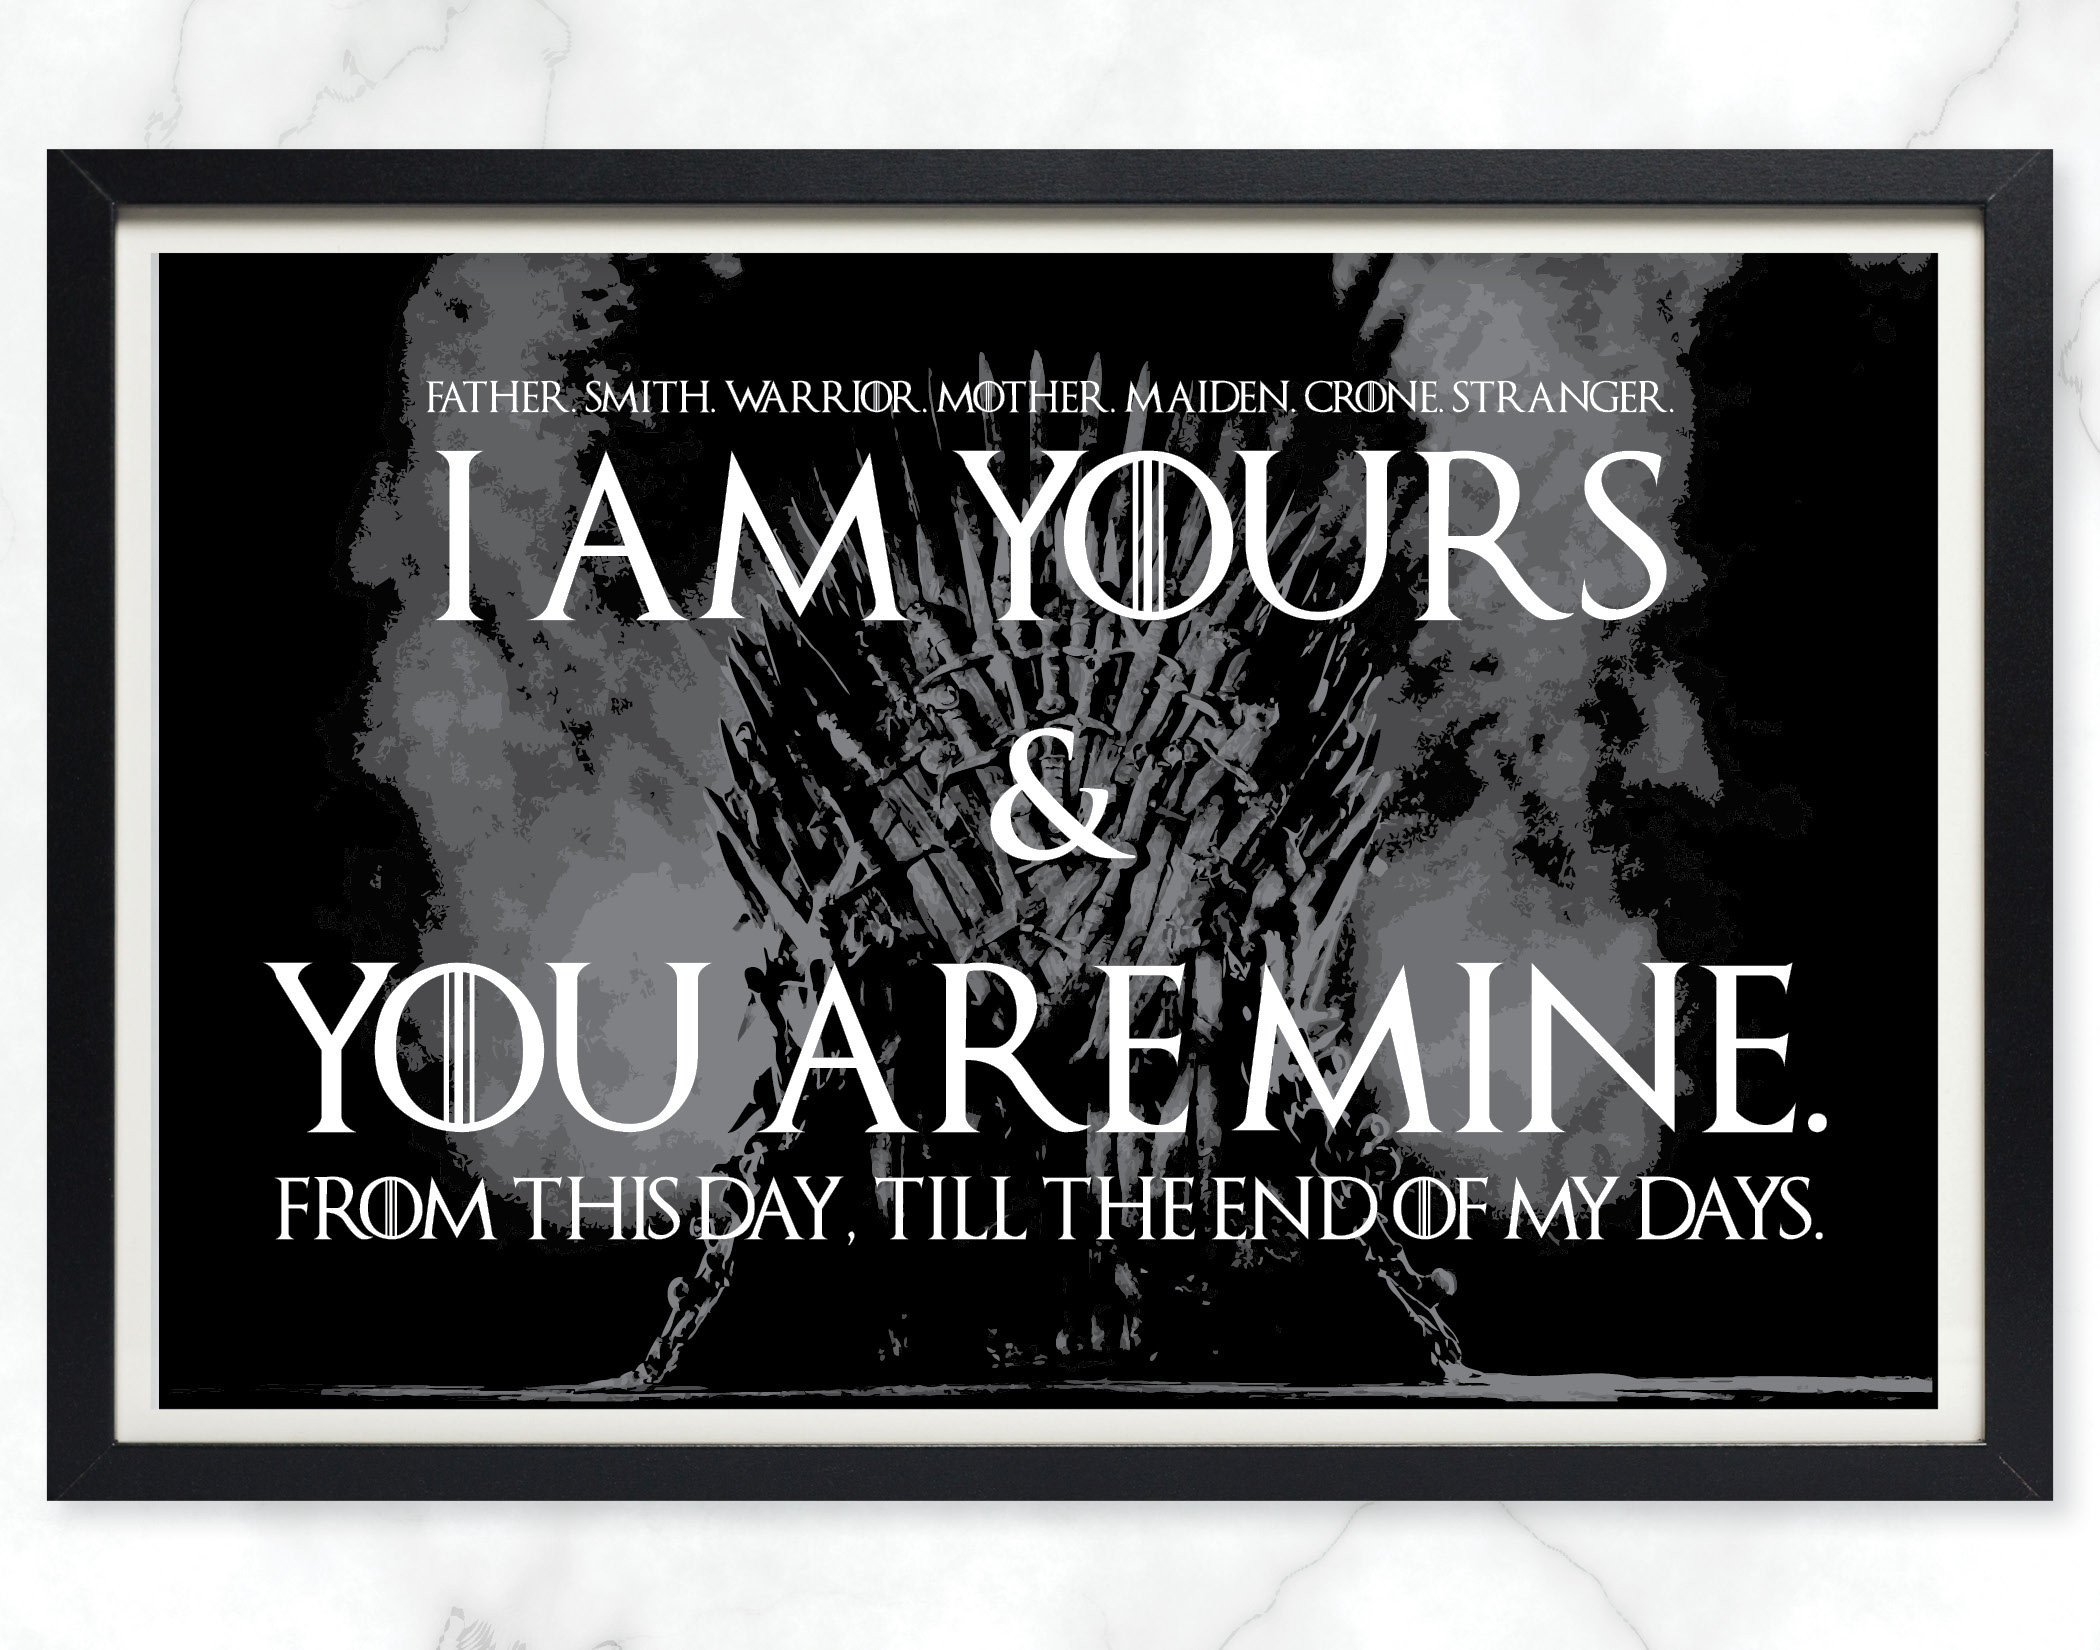 Game Of Thrones Wedding Vows
 Game of Thrones Wedding Vows Print I am yours and you are